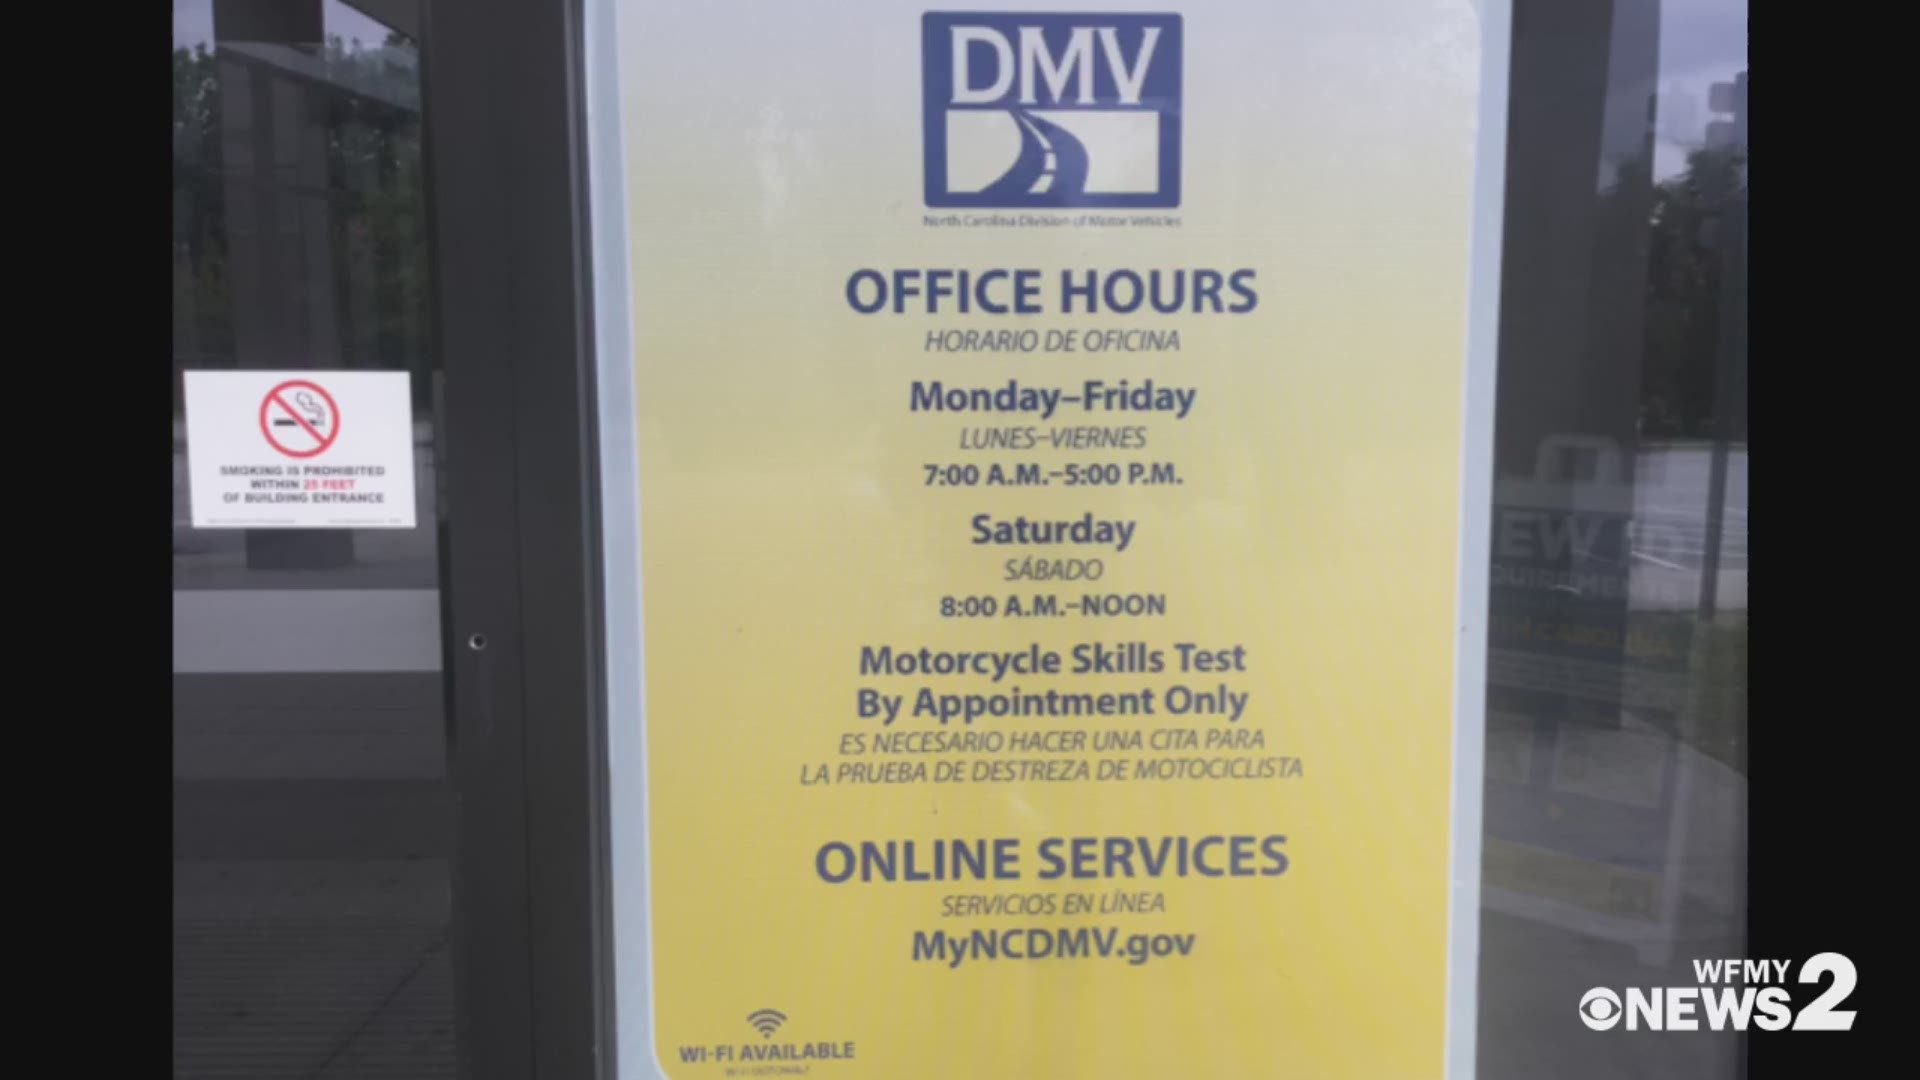 Greensboro DMV on Coliseum Blvd. experiencing long wait times due to short staff.